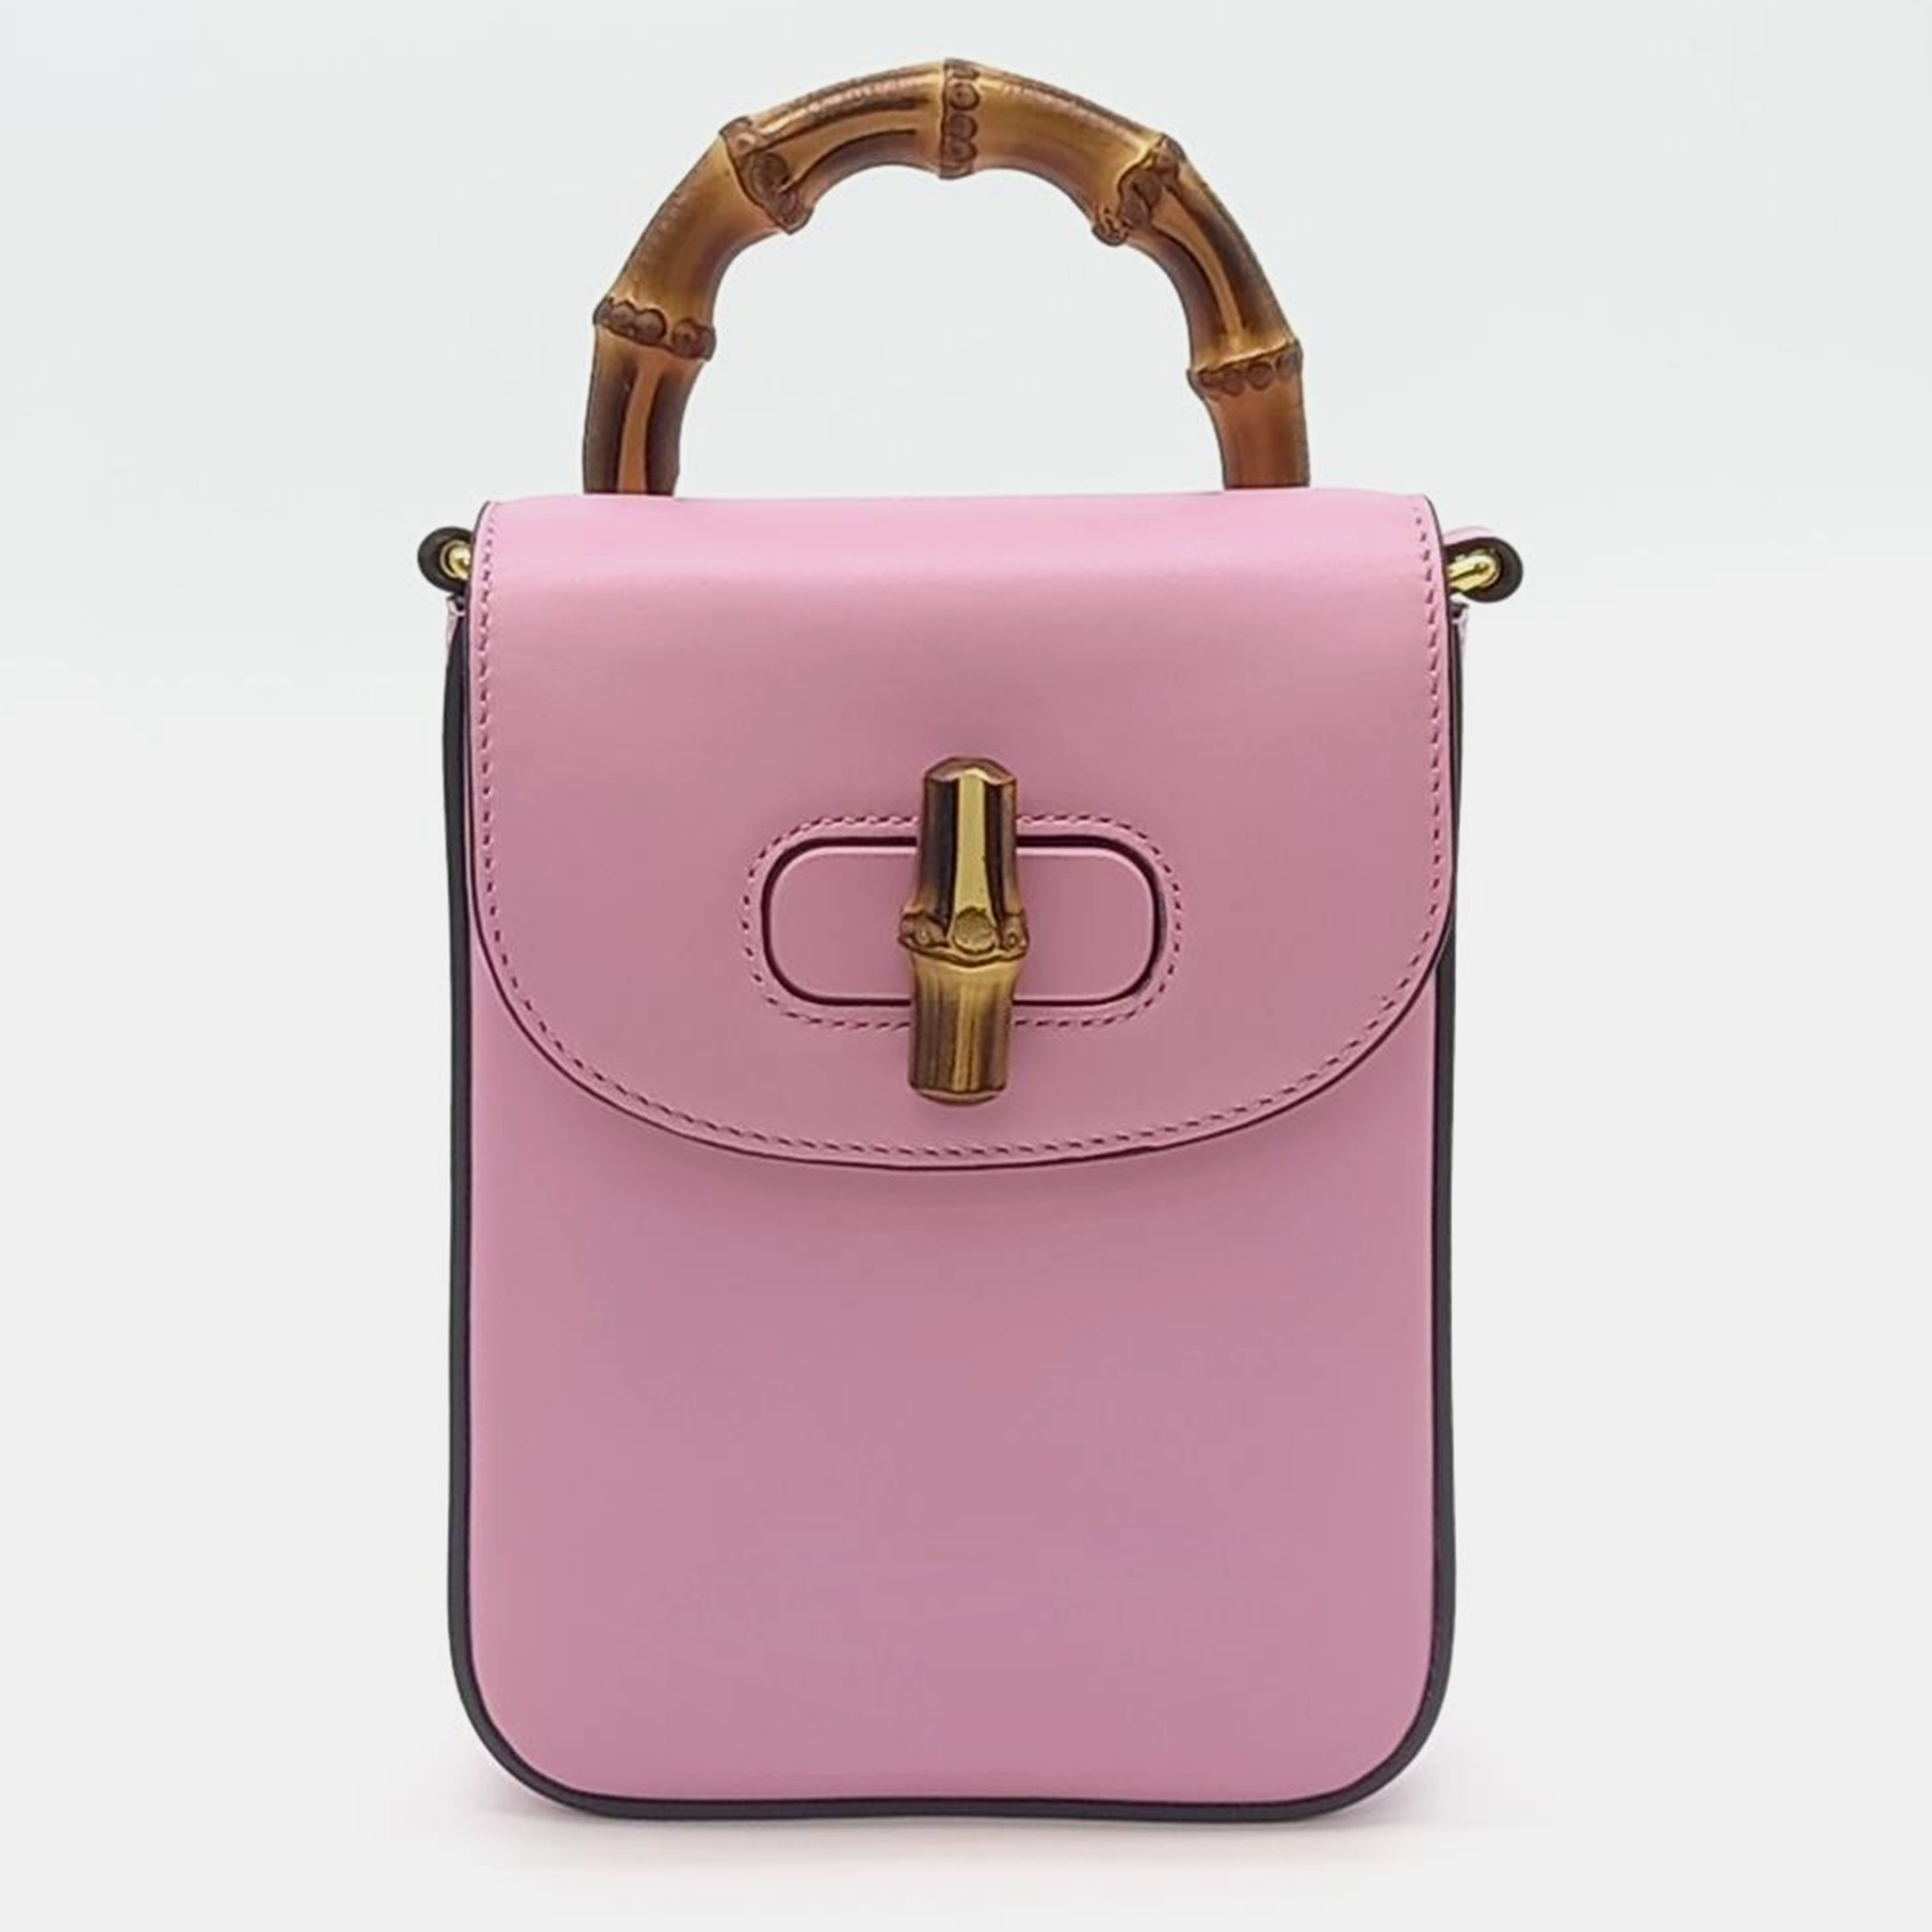 Pre-owned Gucci Pink Leather Mini Bamboo Tote Bag